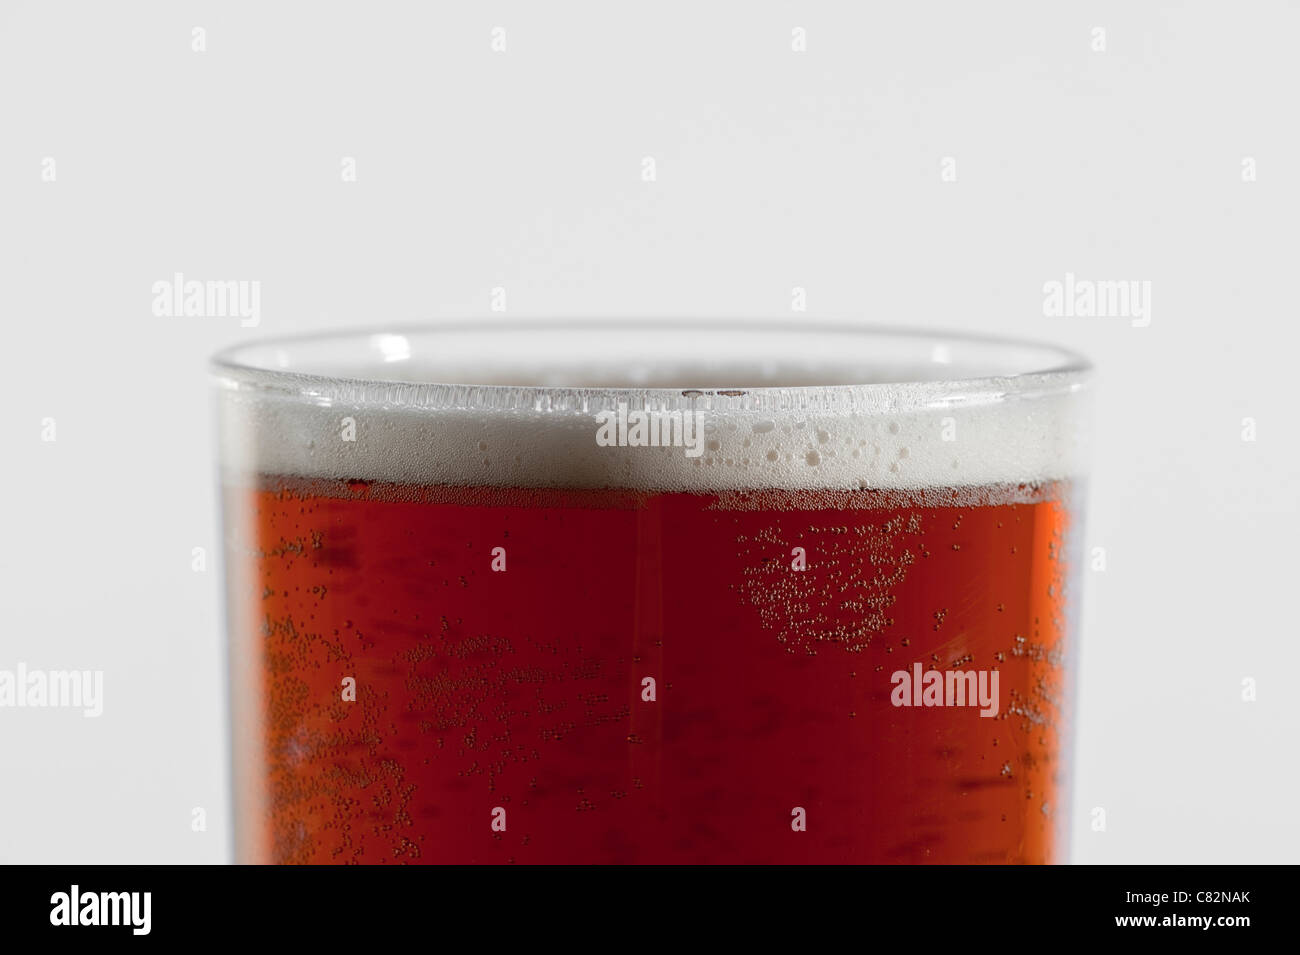 A glass of bitter / ale / beer on a white background Stock Photo